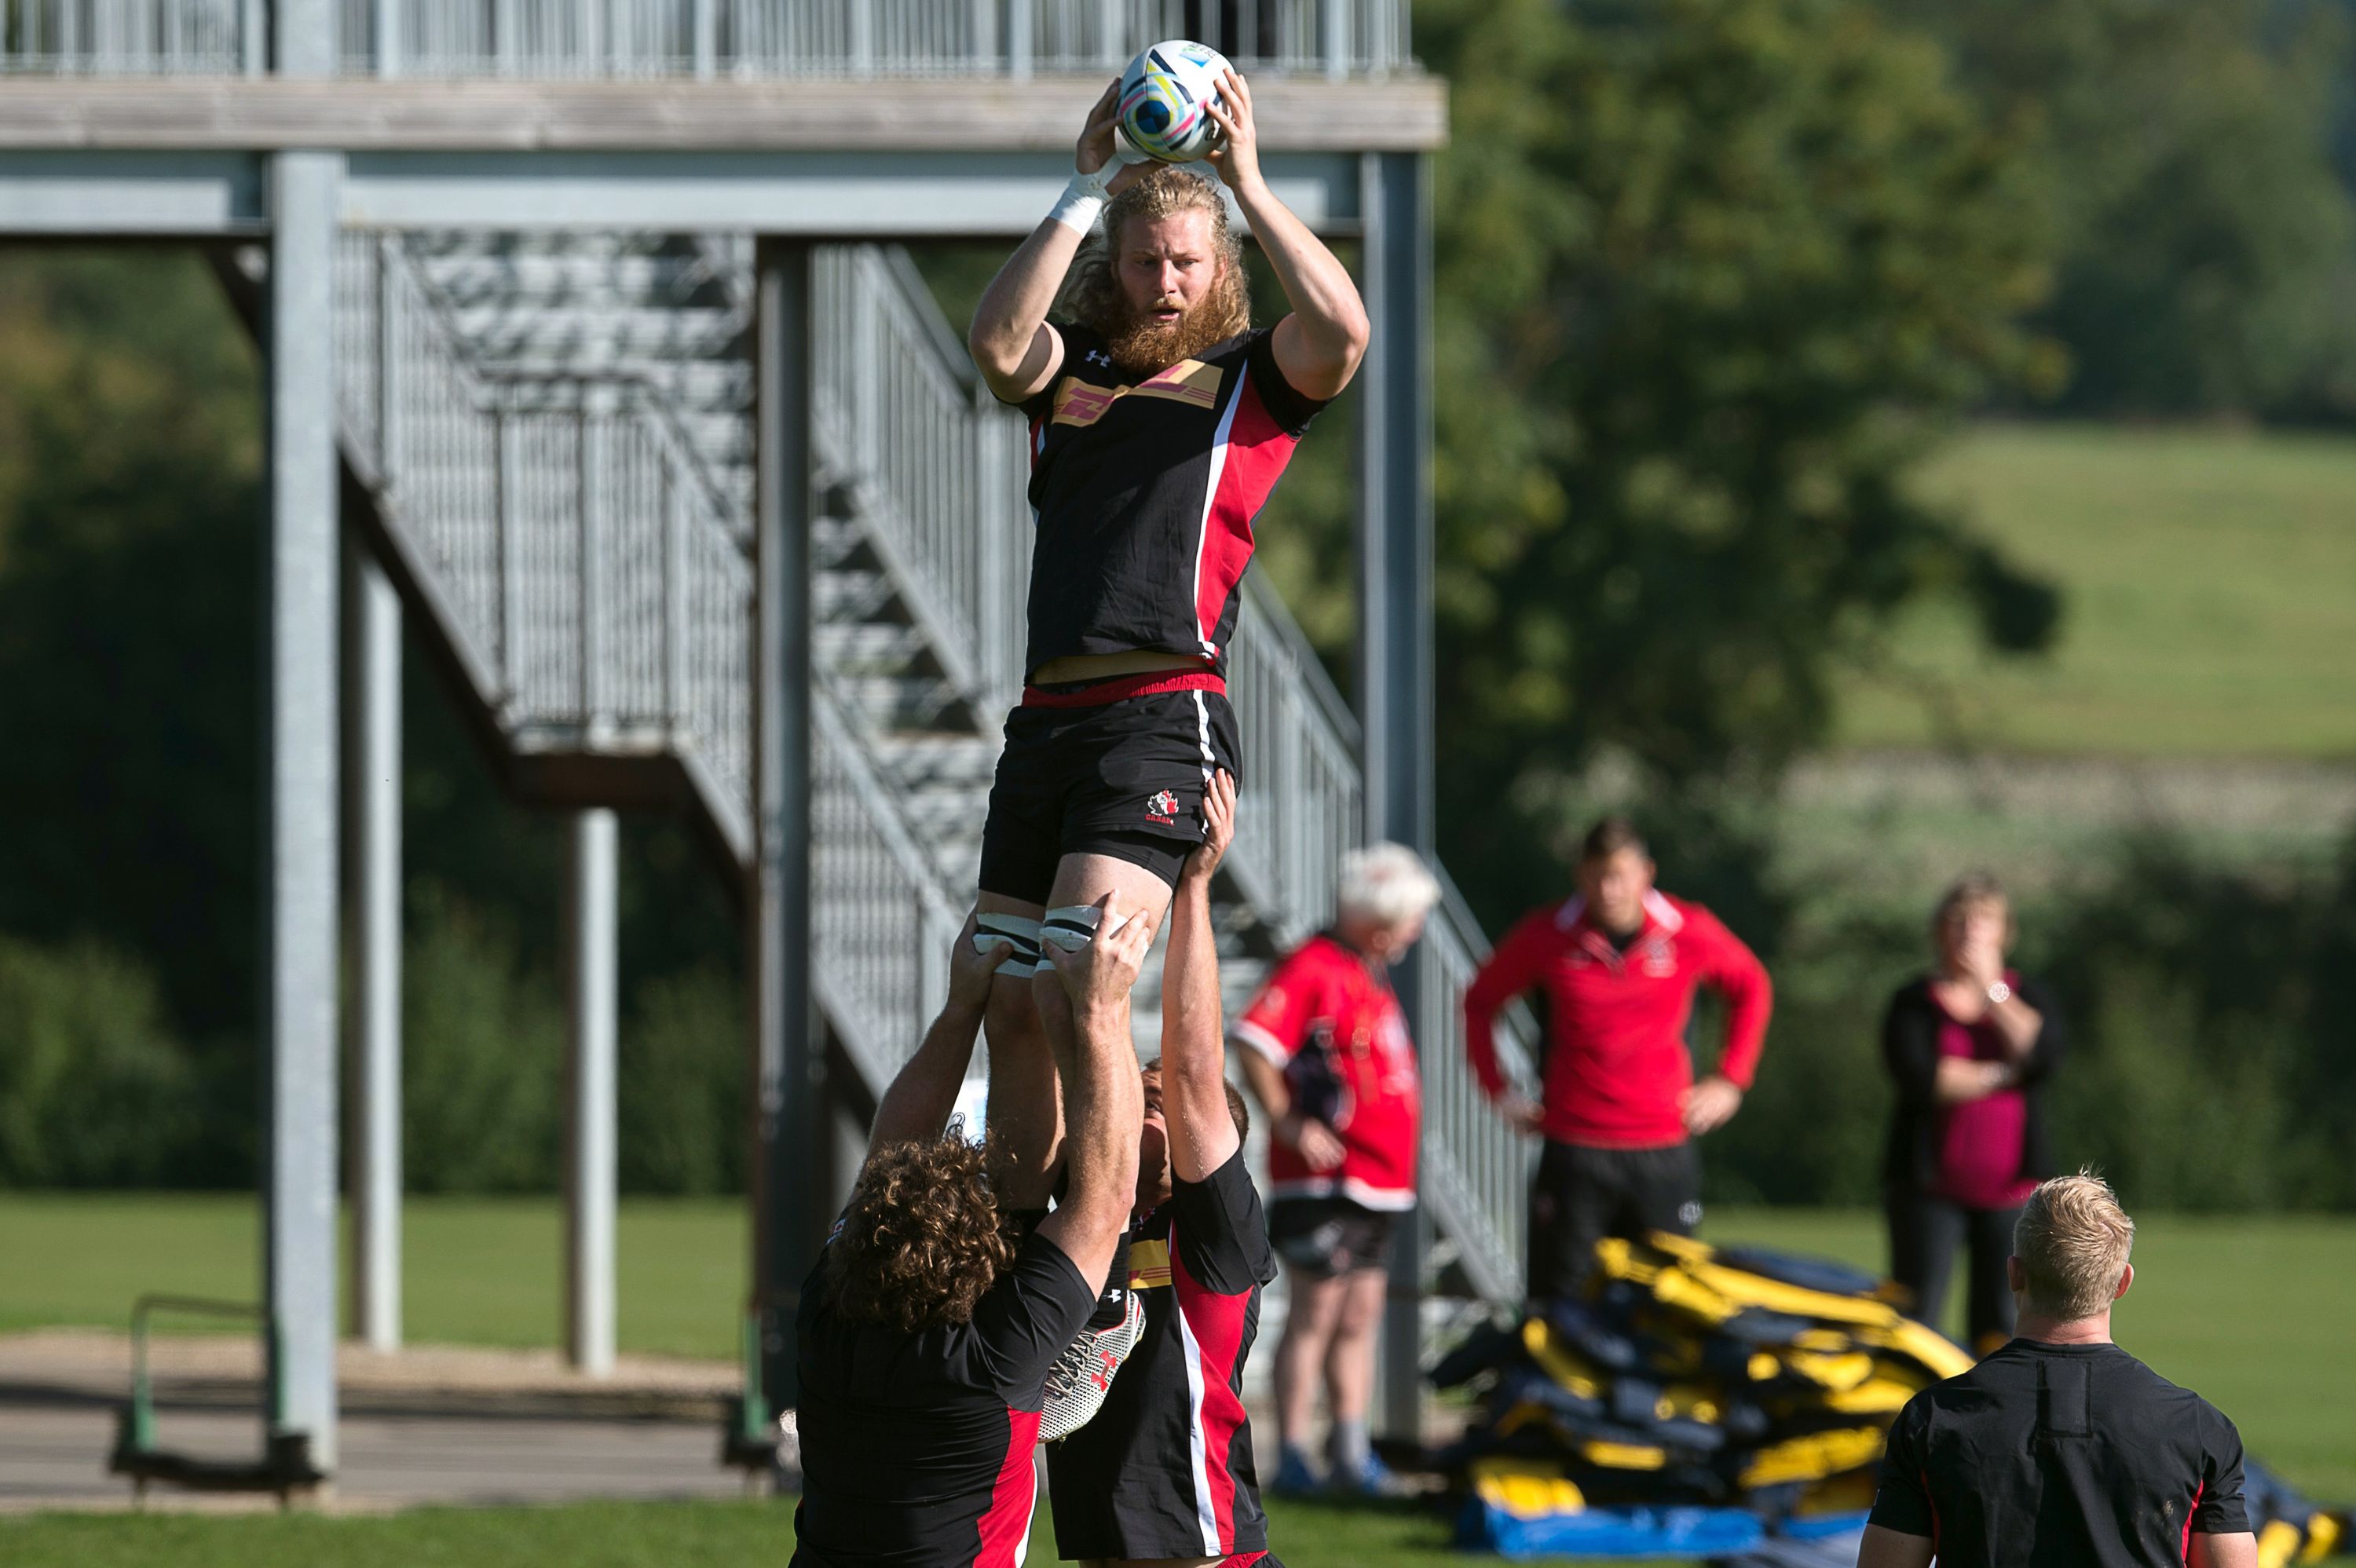 Canada's lock Evan Olmstead (up) practices catching the ball in a line out  during a team training session at Leicester Grammar School in Leicester on September 28, 2015, during the 2015 Rugby Union World Cup. AFP PHOTO / BERTRAND LANGLOIS RESTRICTED TO EDITORIAL USE        (Photo credit should read BERTRAND LANGLOIS/AFP/Getty Images)